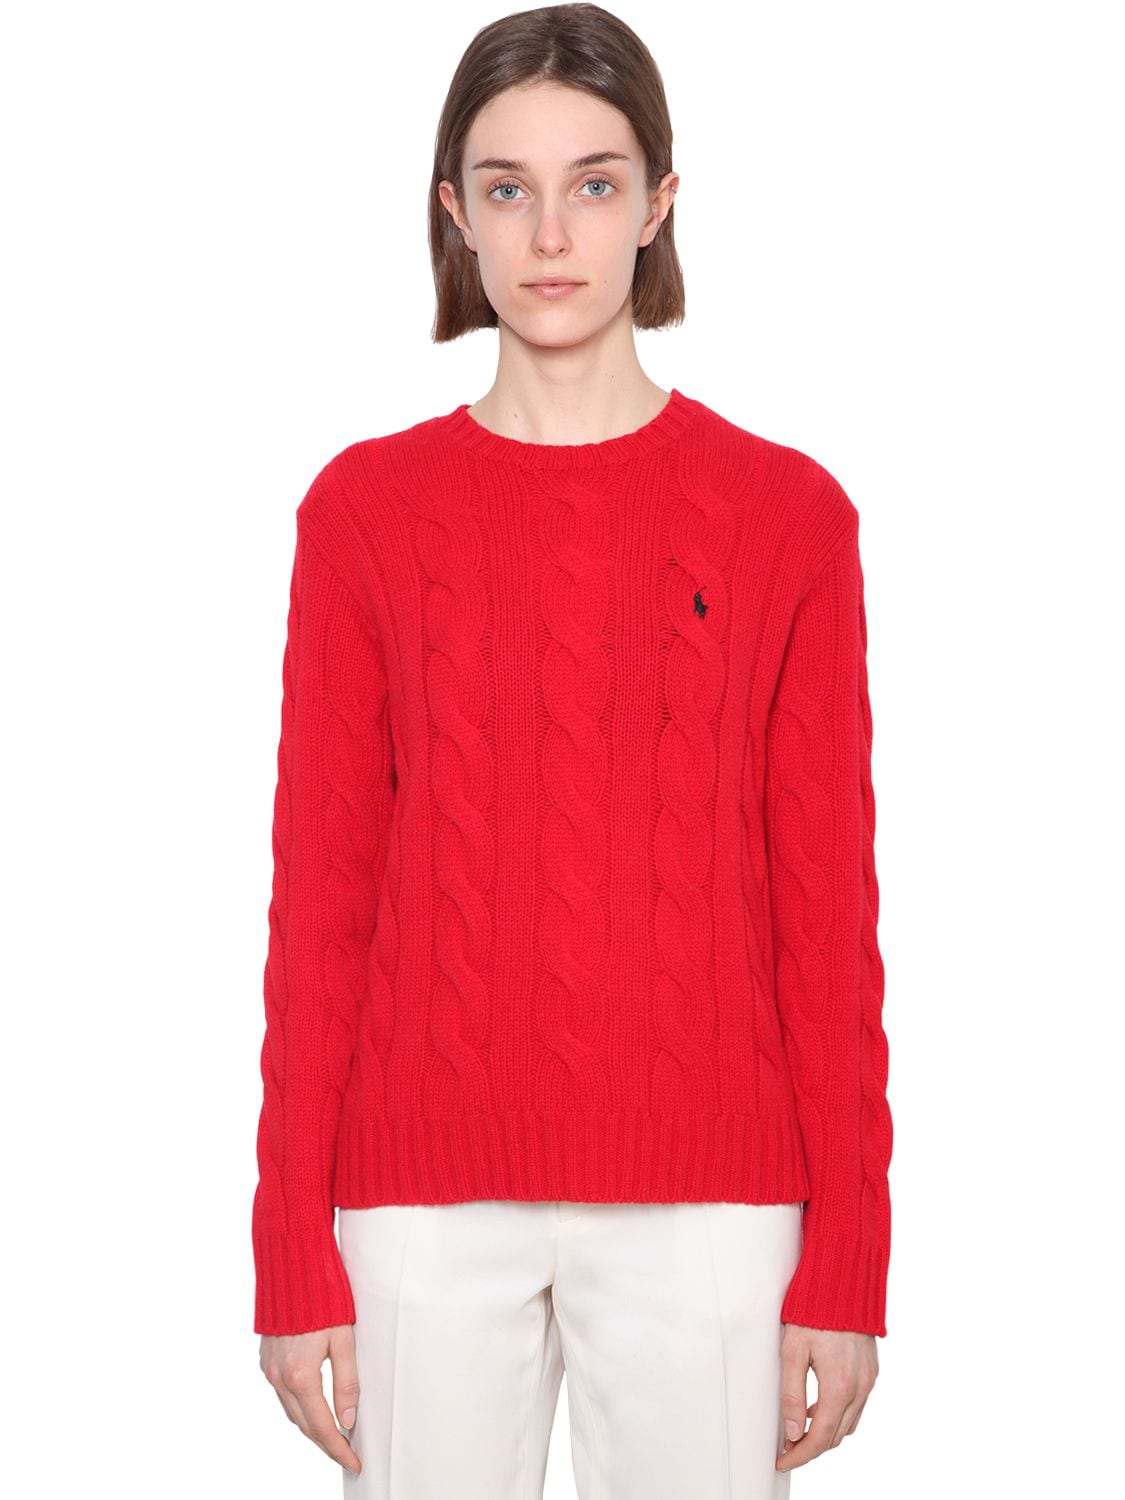 Polo Ralph Lauren Merino Wool & Cashmere Cableknit Sweater In Red